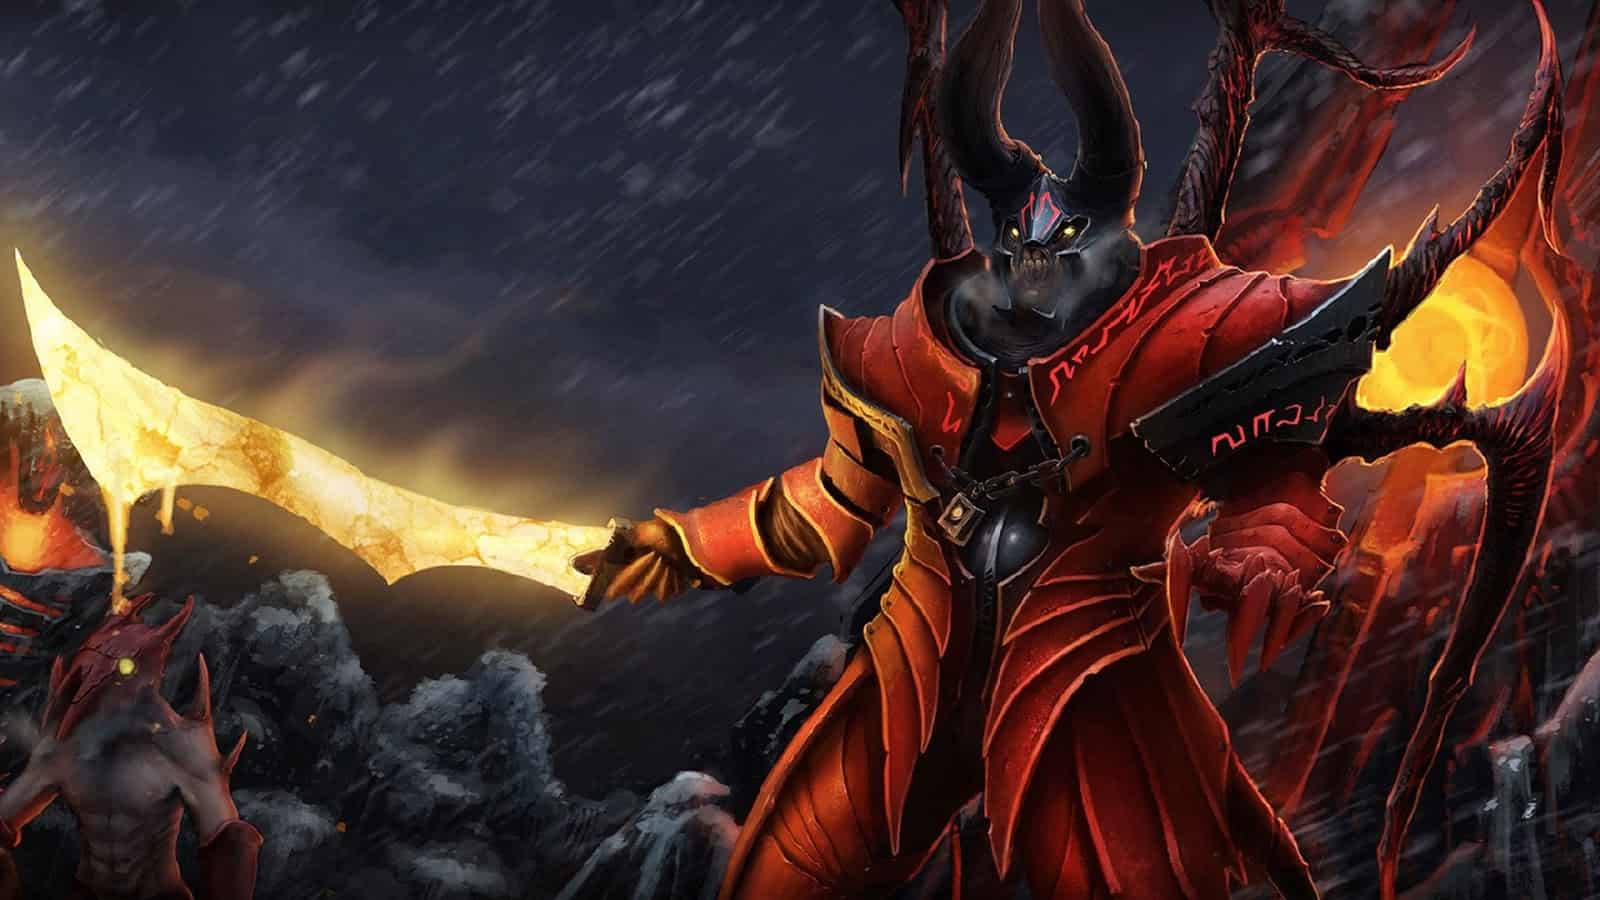 Dota 2: Which Were The Top Heroes In The DPC In Western & Eastern Europe?